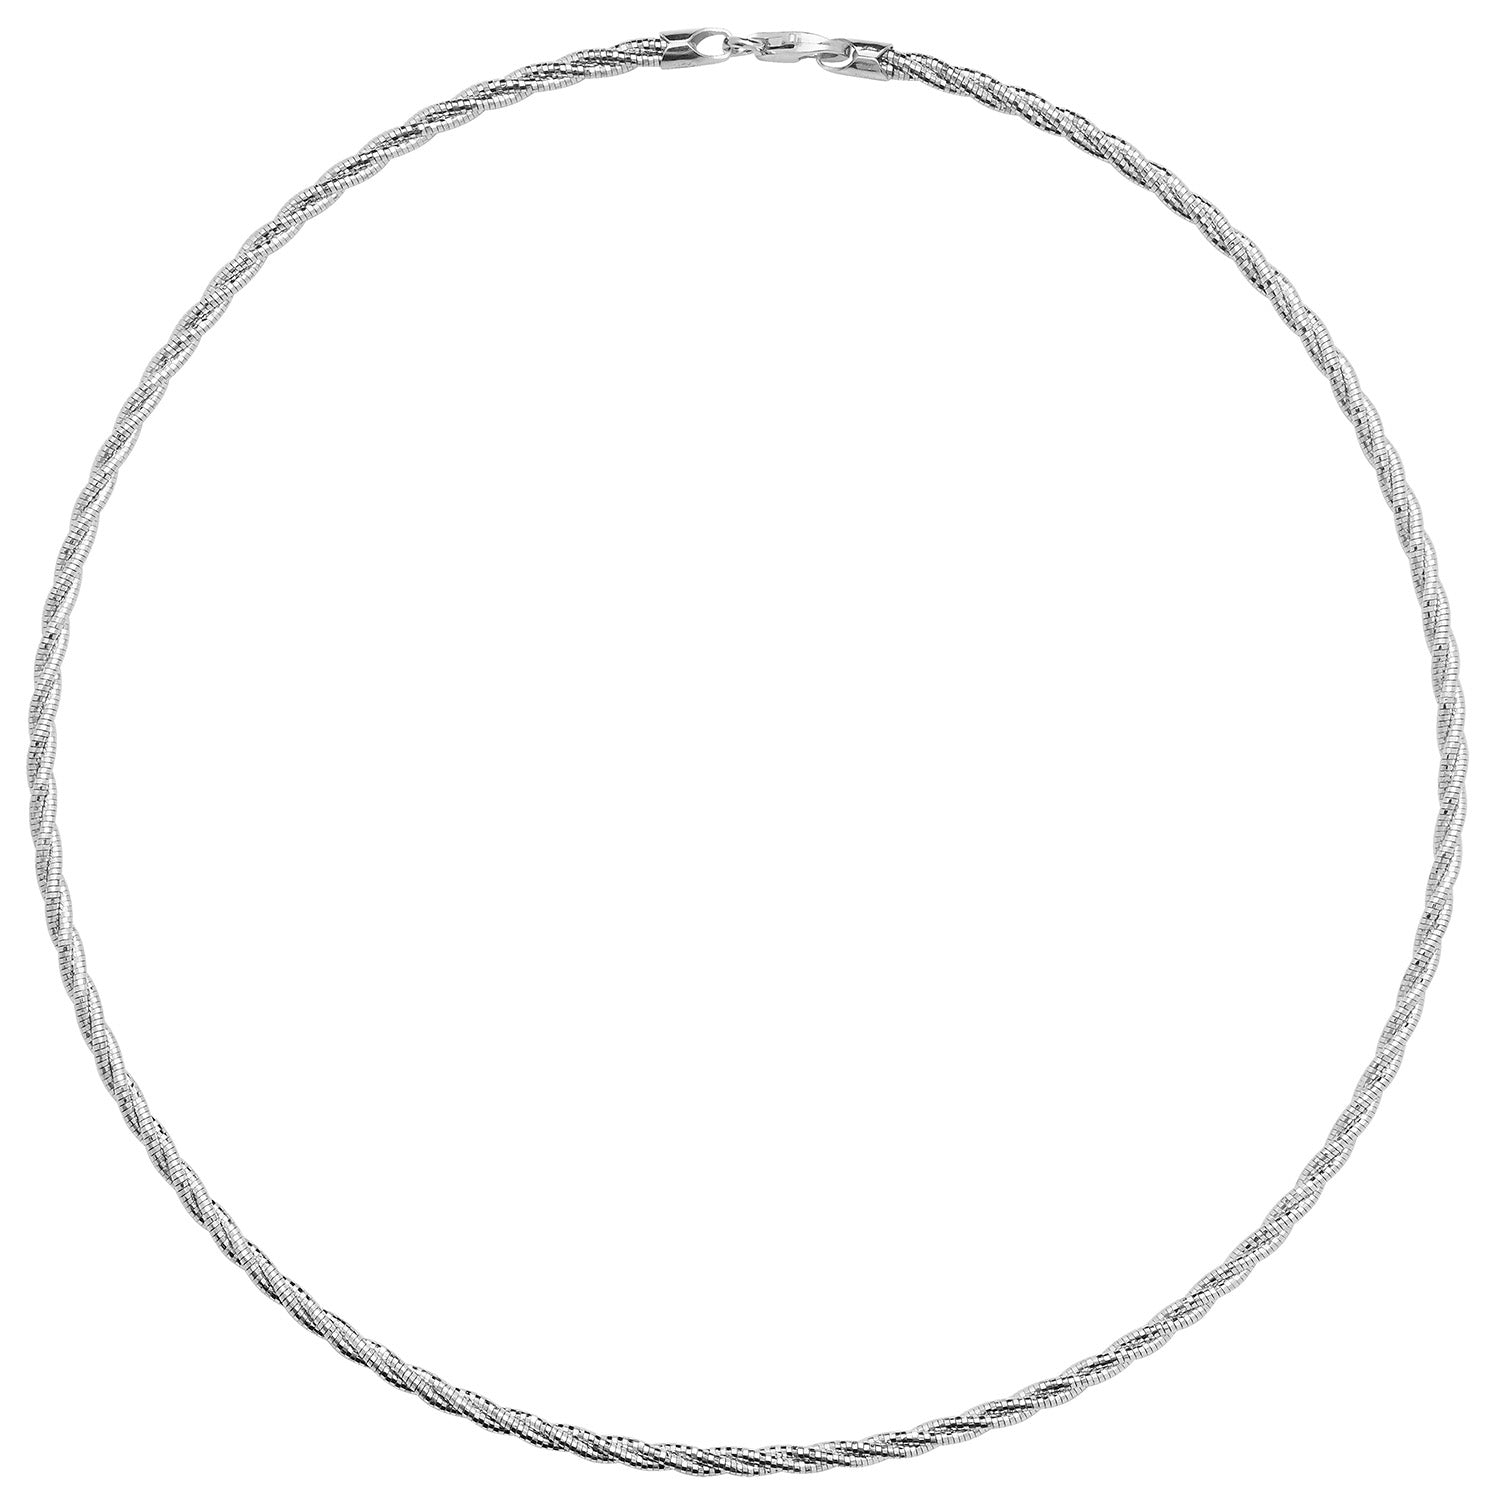 SILVER RHODIUM PLATED TWISTED NECKLET